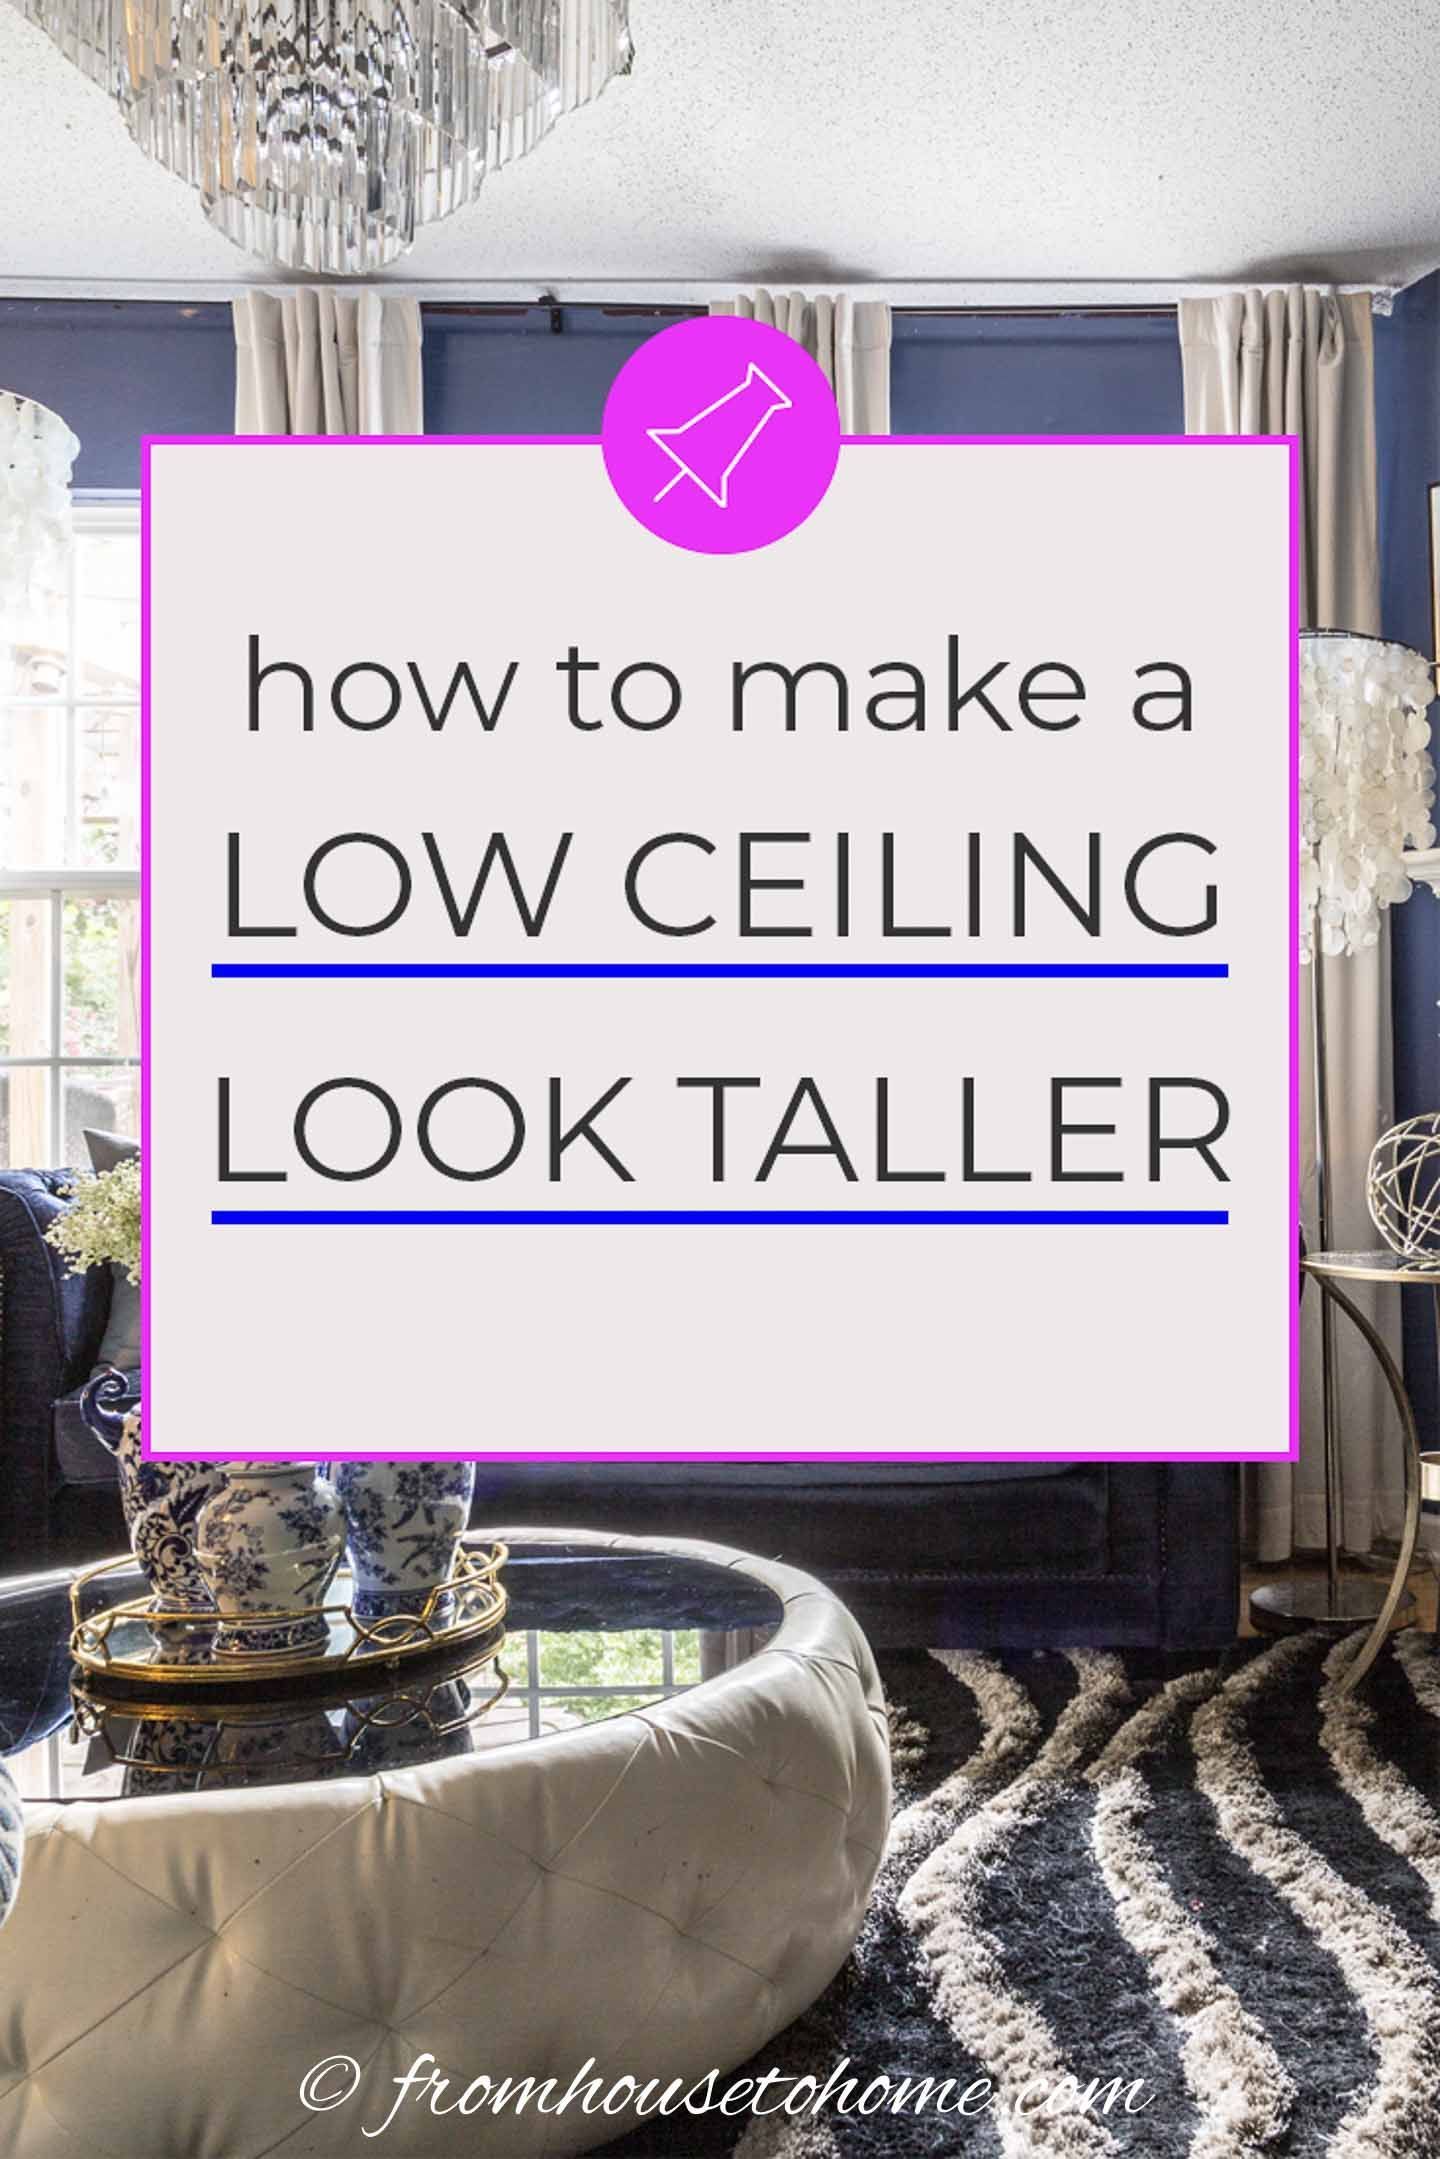 10 Easy Ways To Make A Low Ceiling Look Higher -   13 room decor Easy ceilings ideas